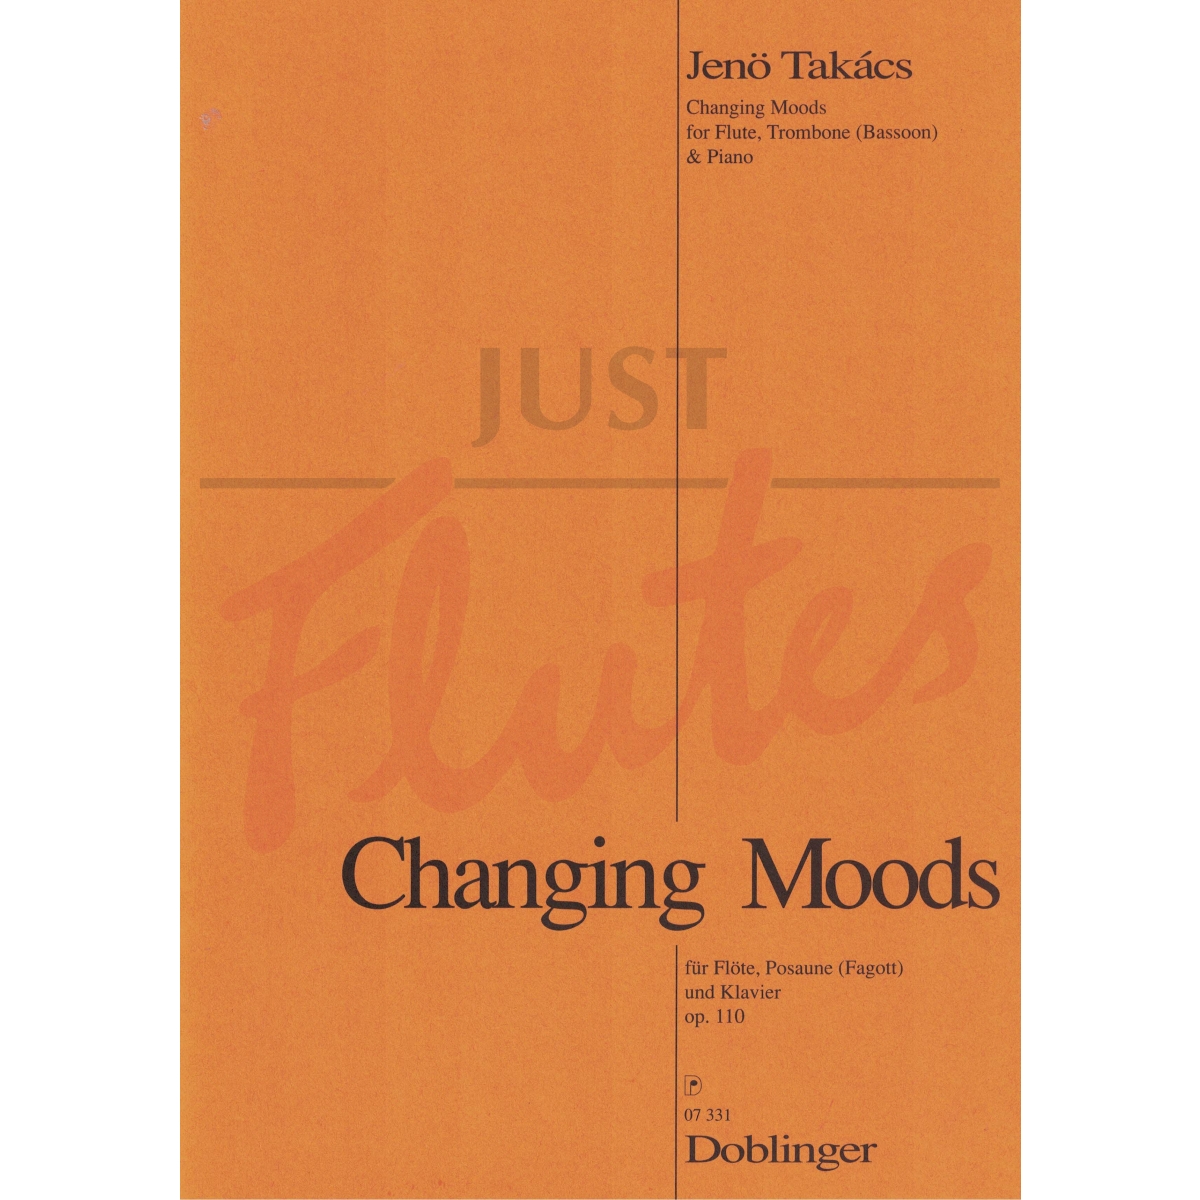 Changing Moods for Flute, Trombone and Piano